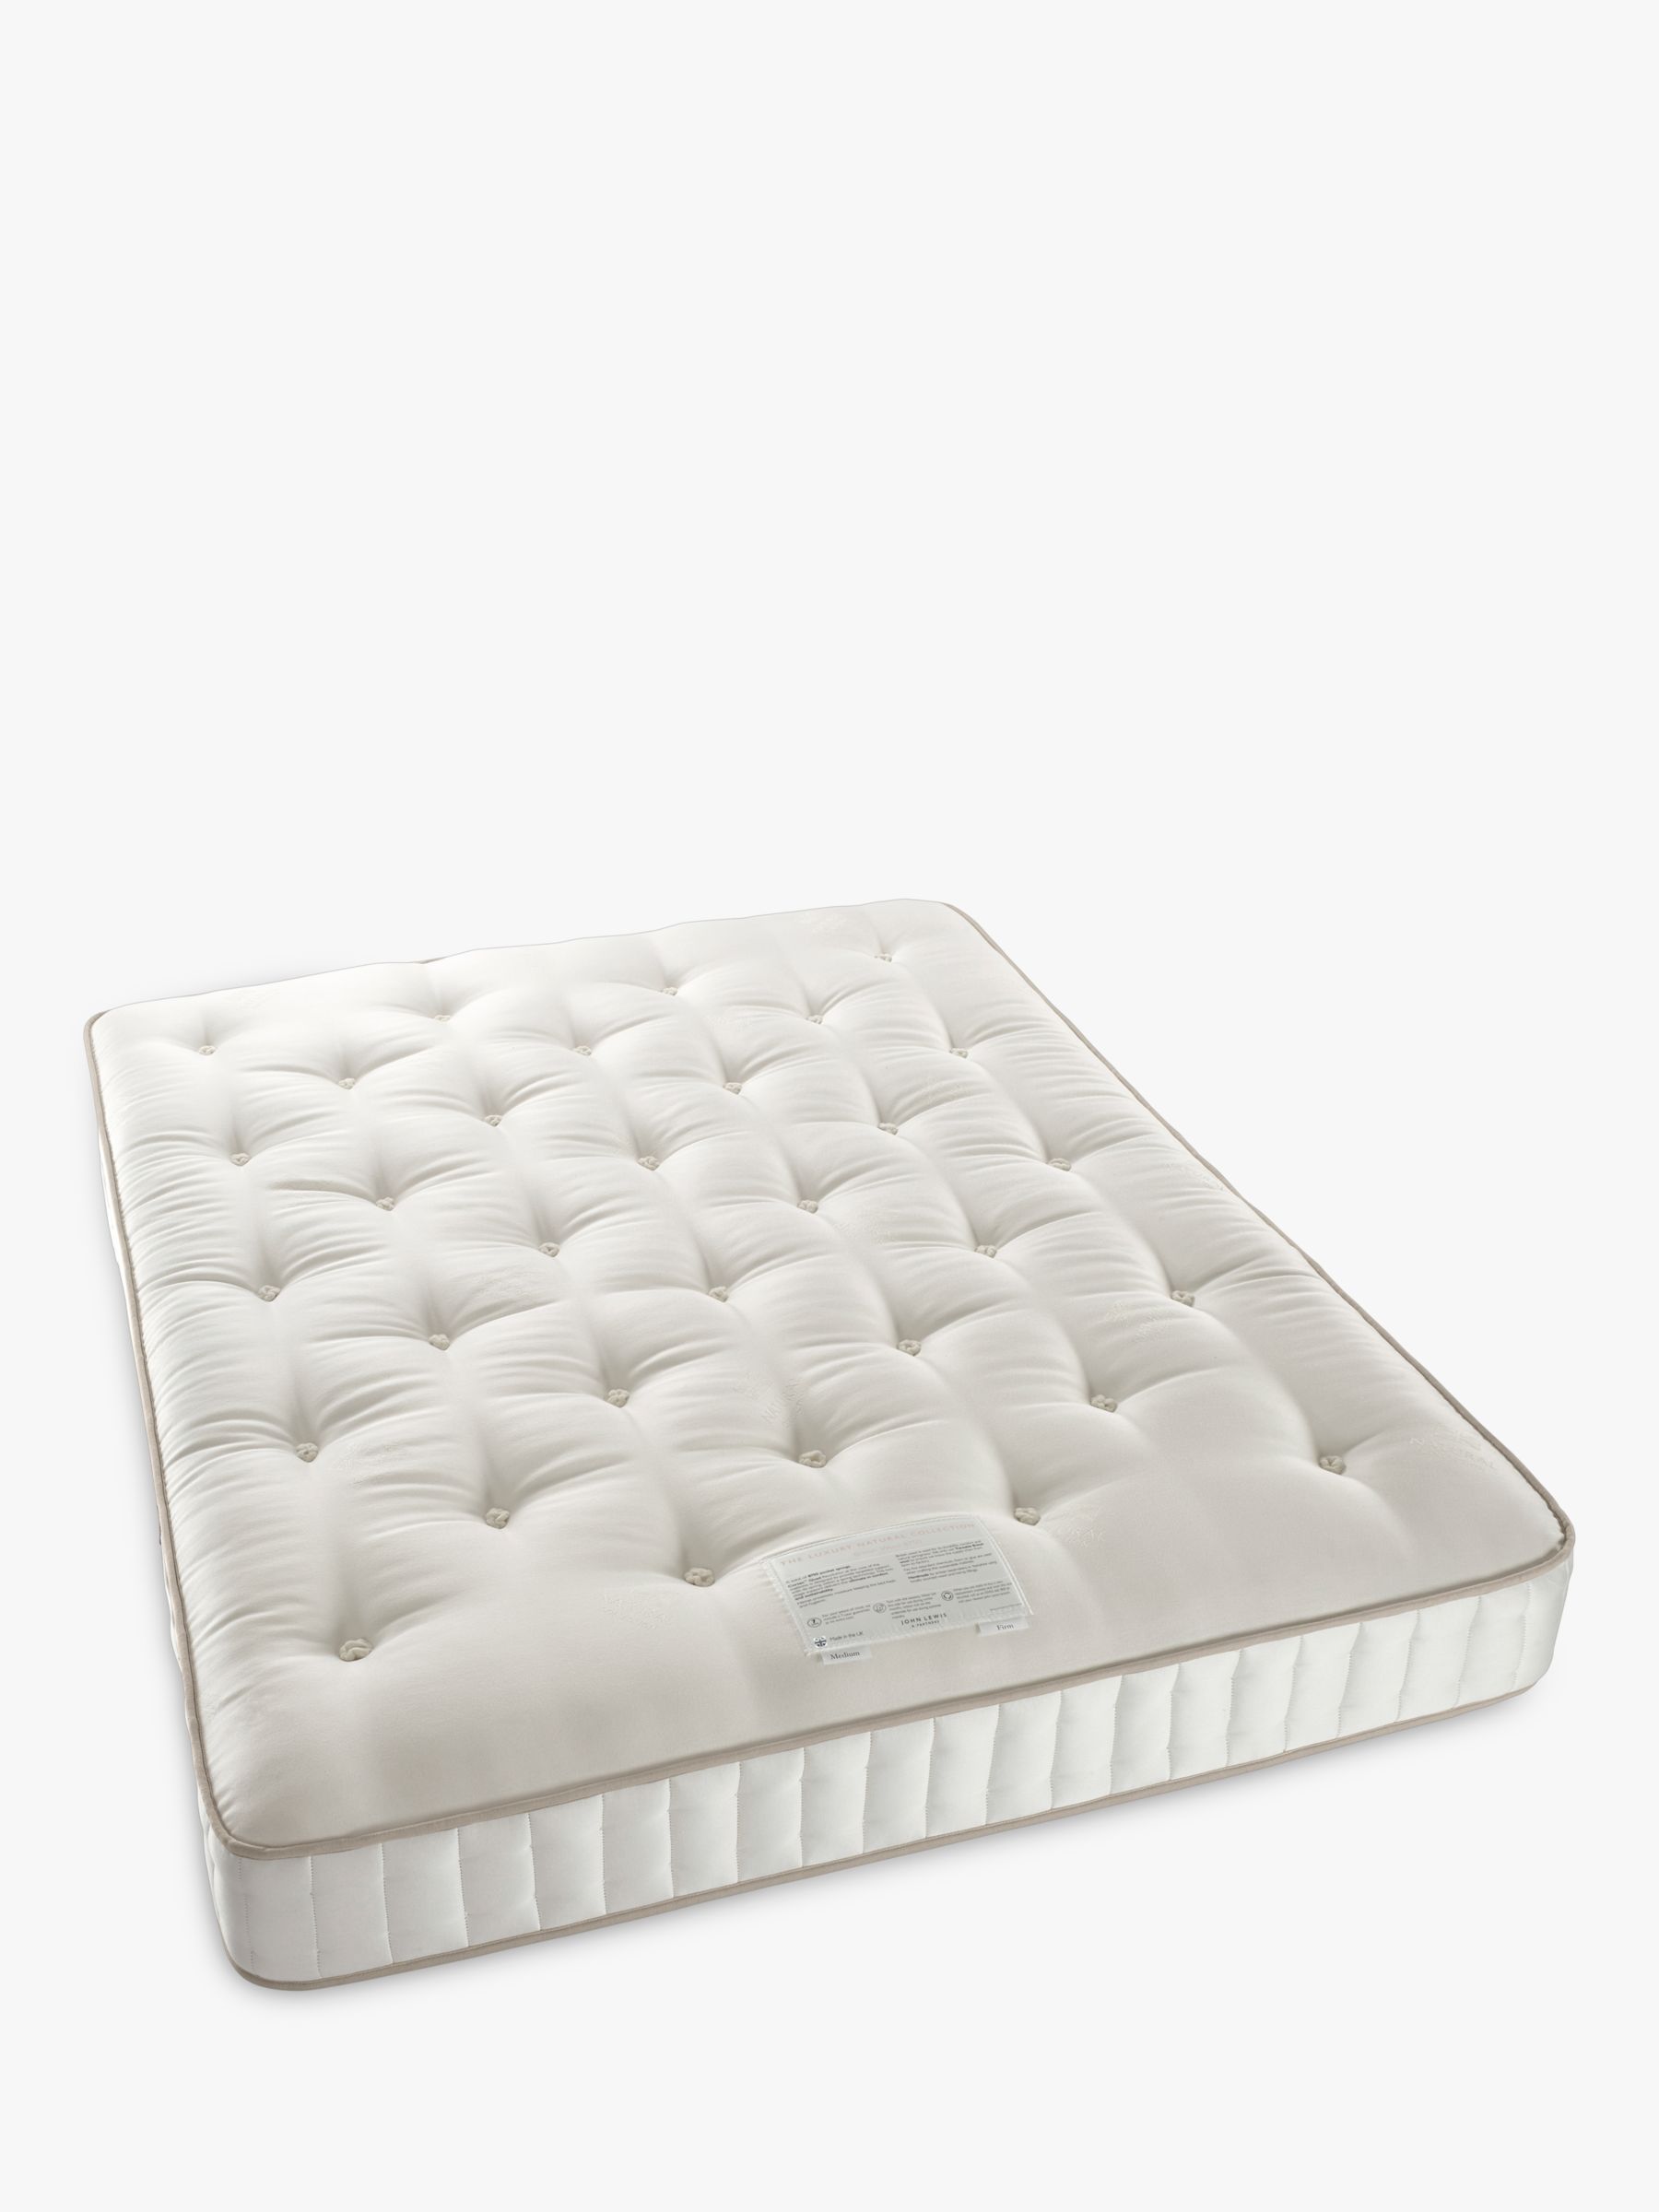 Photo of John lewis luxury natural collection egyptian cotton 5750 super king size firmer tension pocket spring mattress